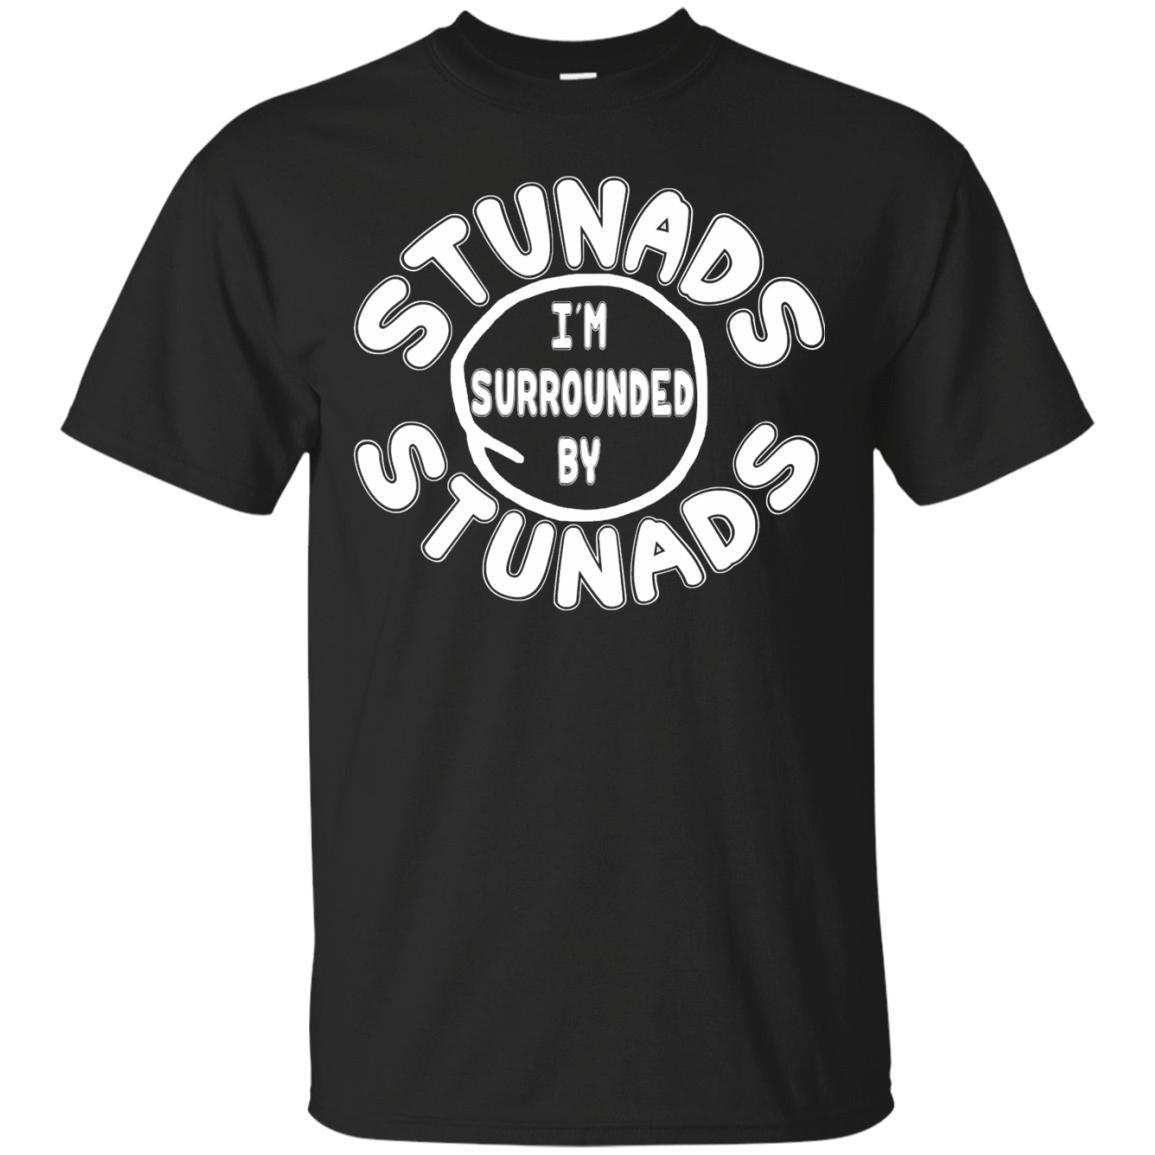 Surrounded By Stunads Shirt